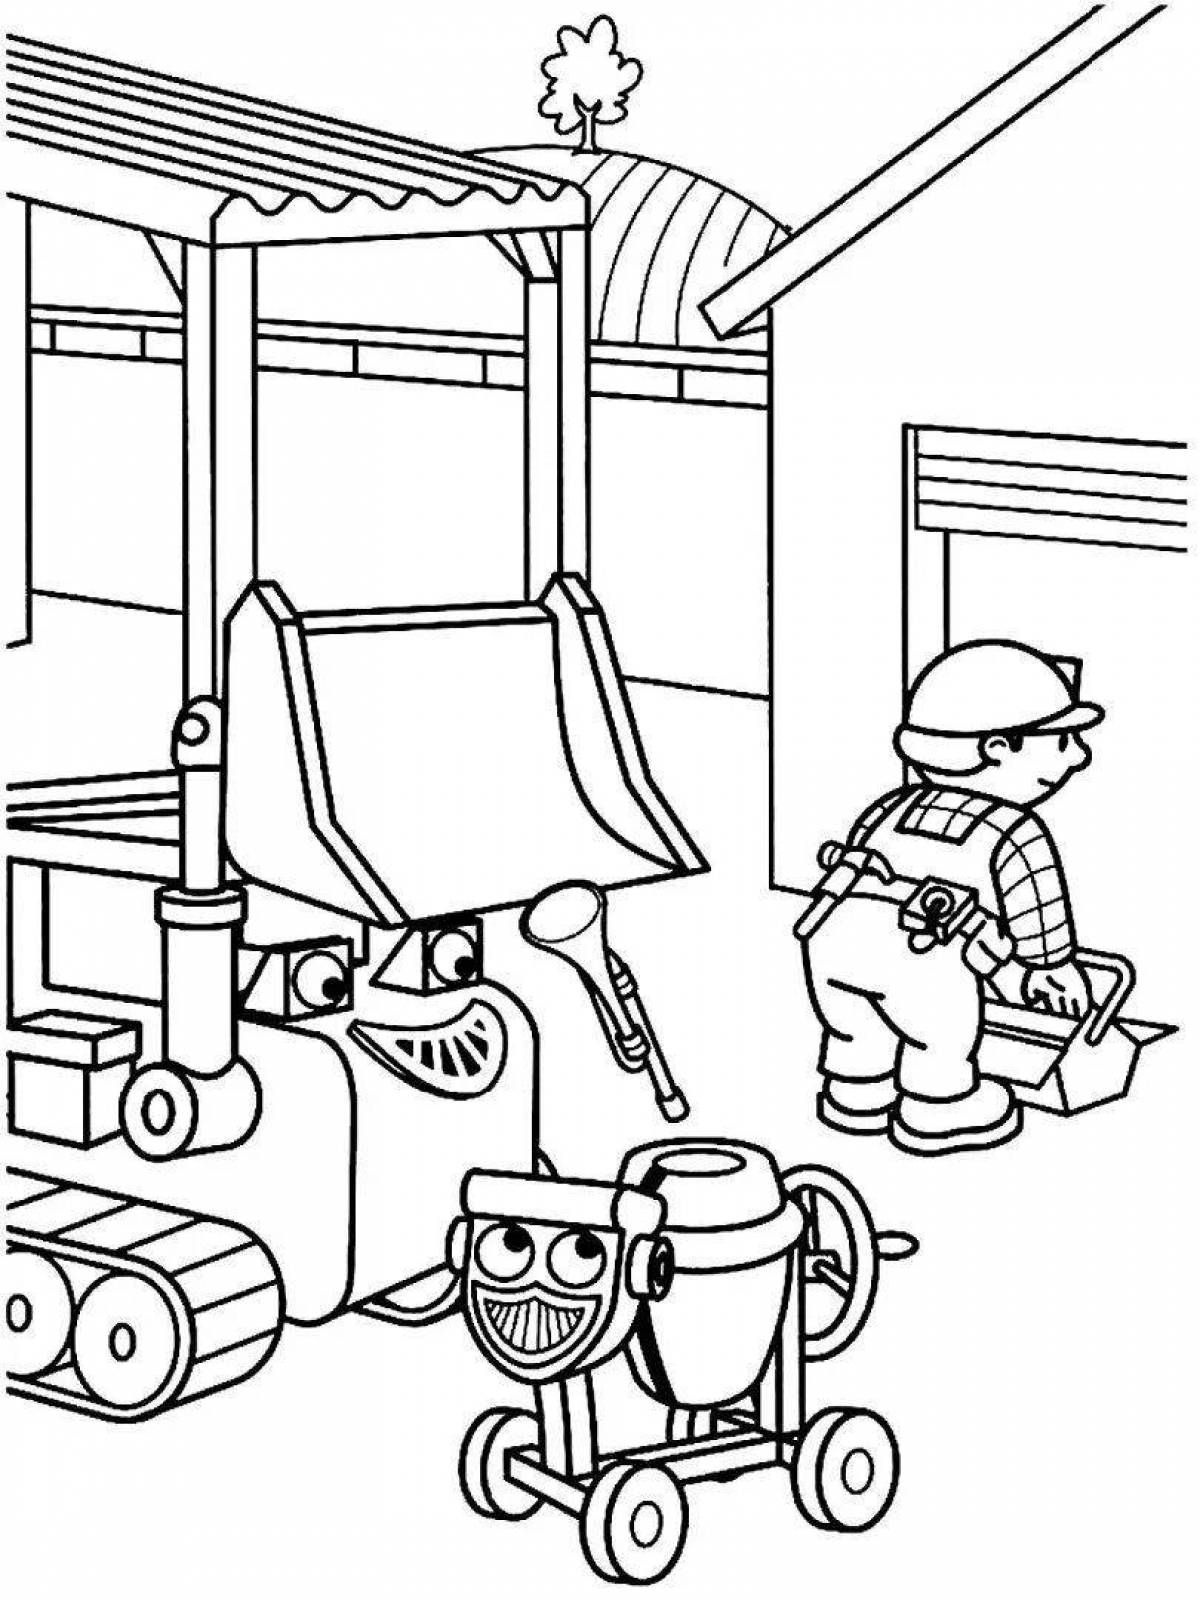 Playful building coloring page for kids